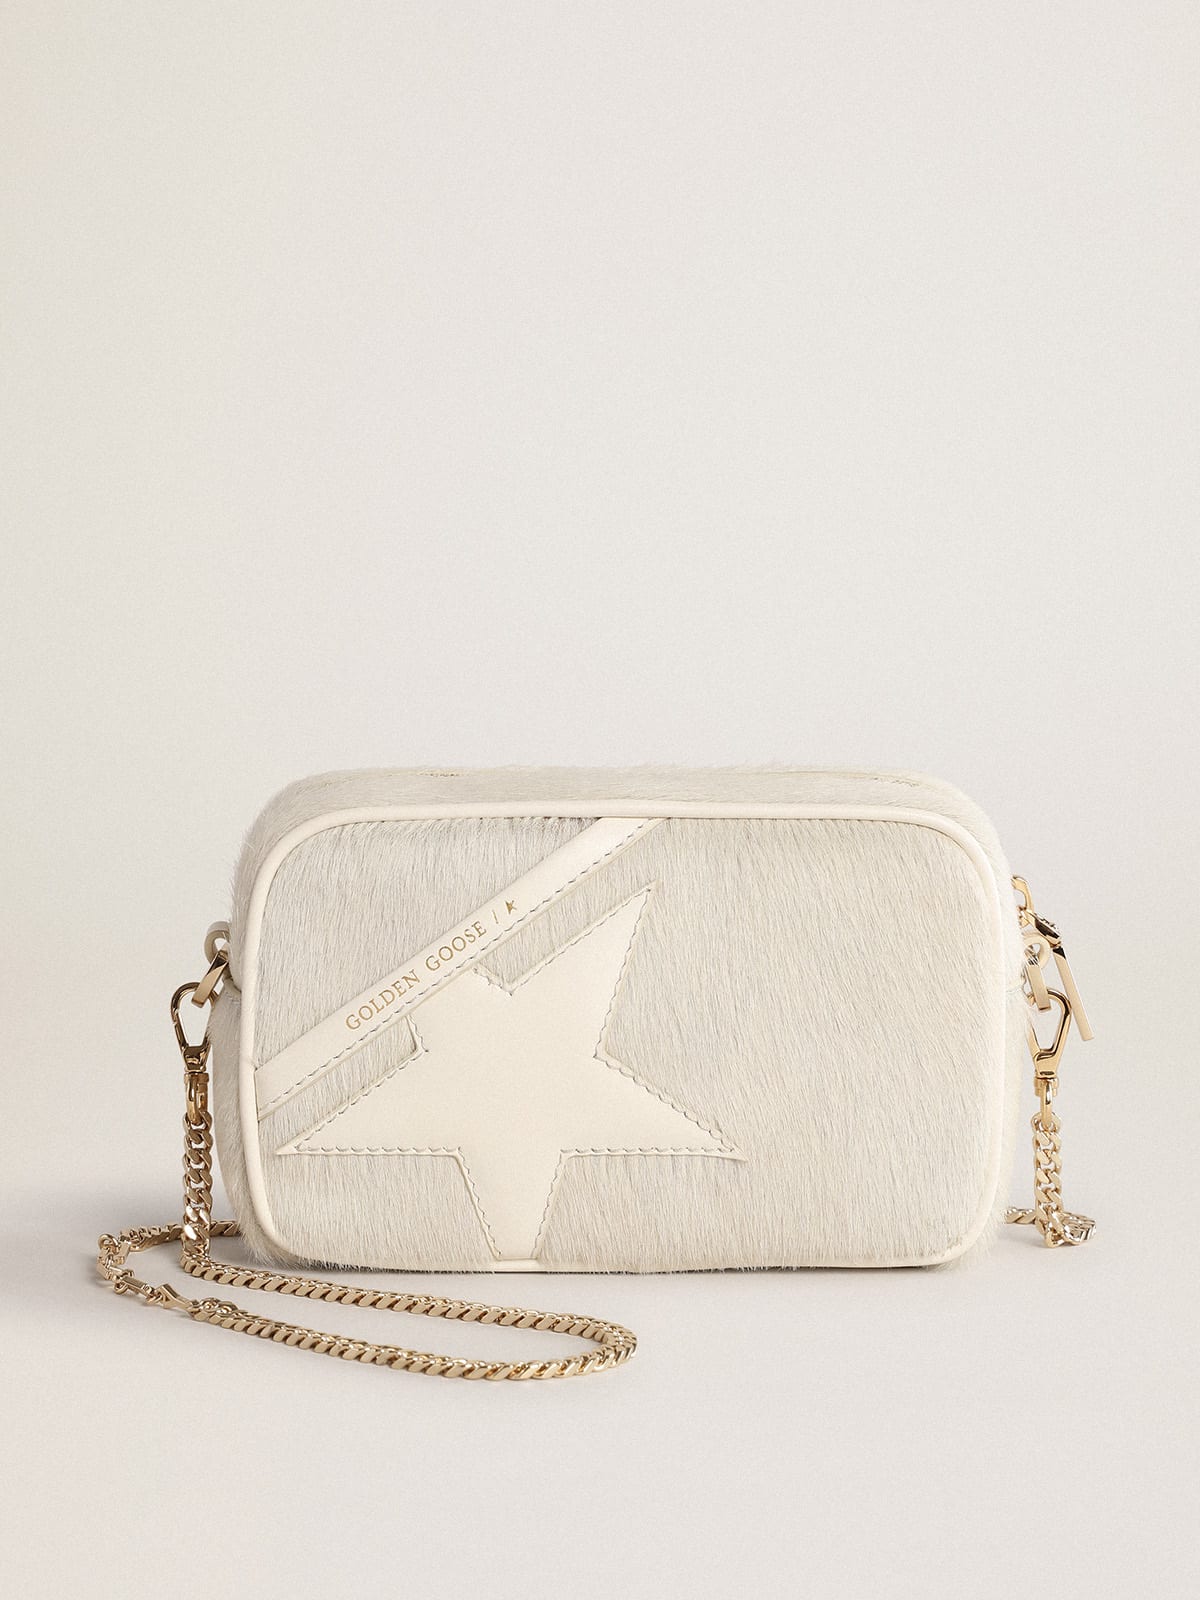 Mini Star Bag in heritage white leather with tone-on-tone star